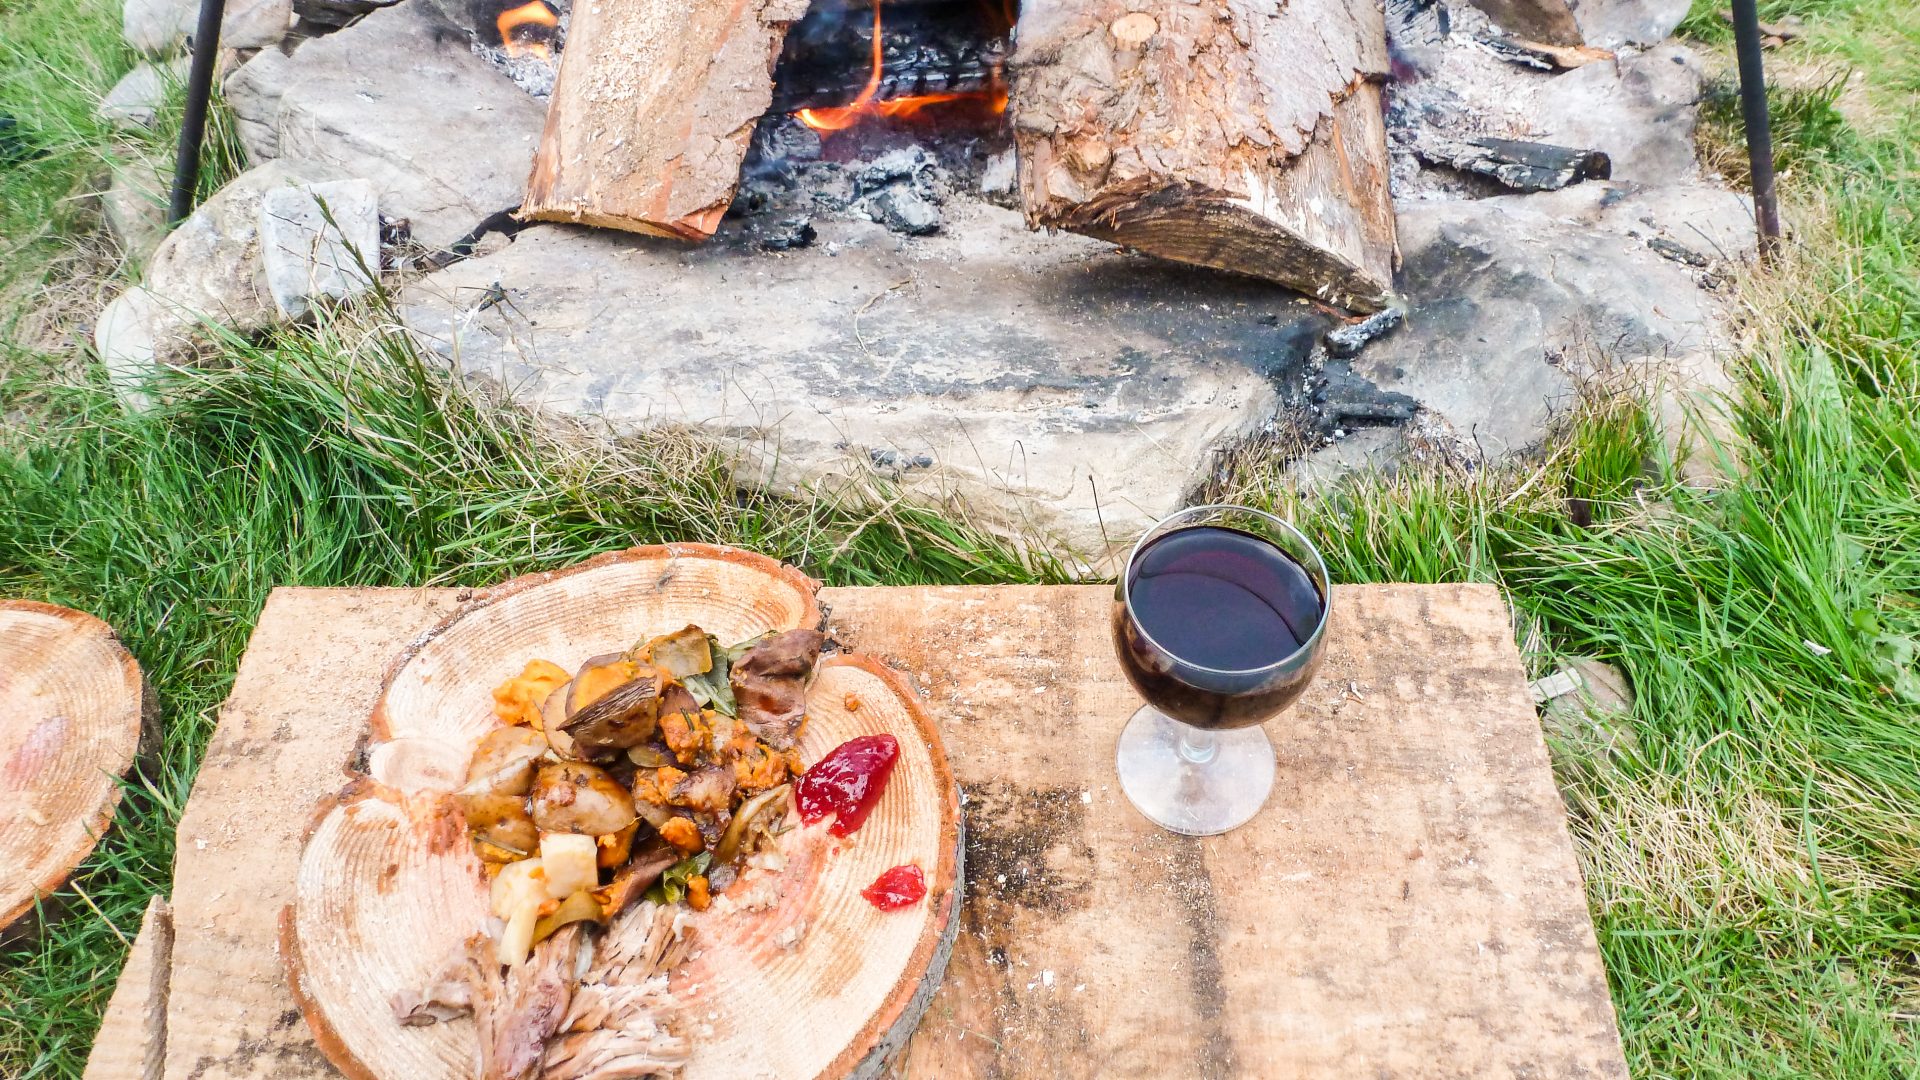 Experiencing nature: Enjoying pit-roasted meal by campfire, Prehistoric Cookery